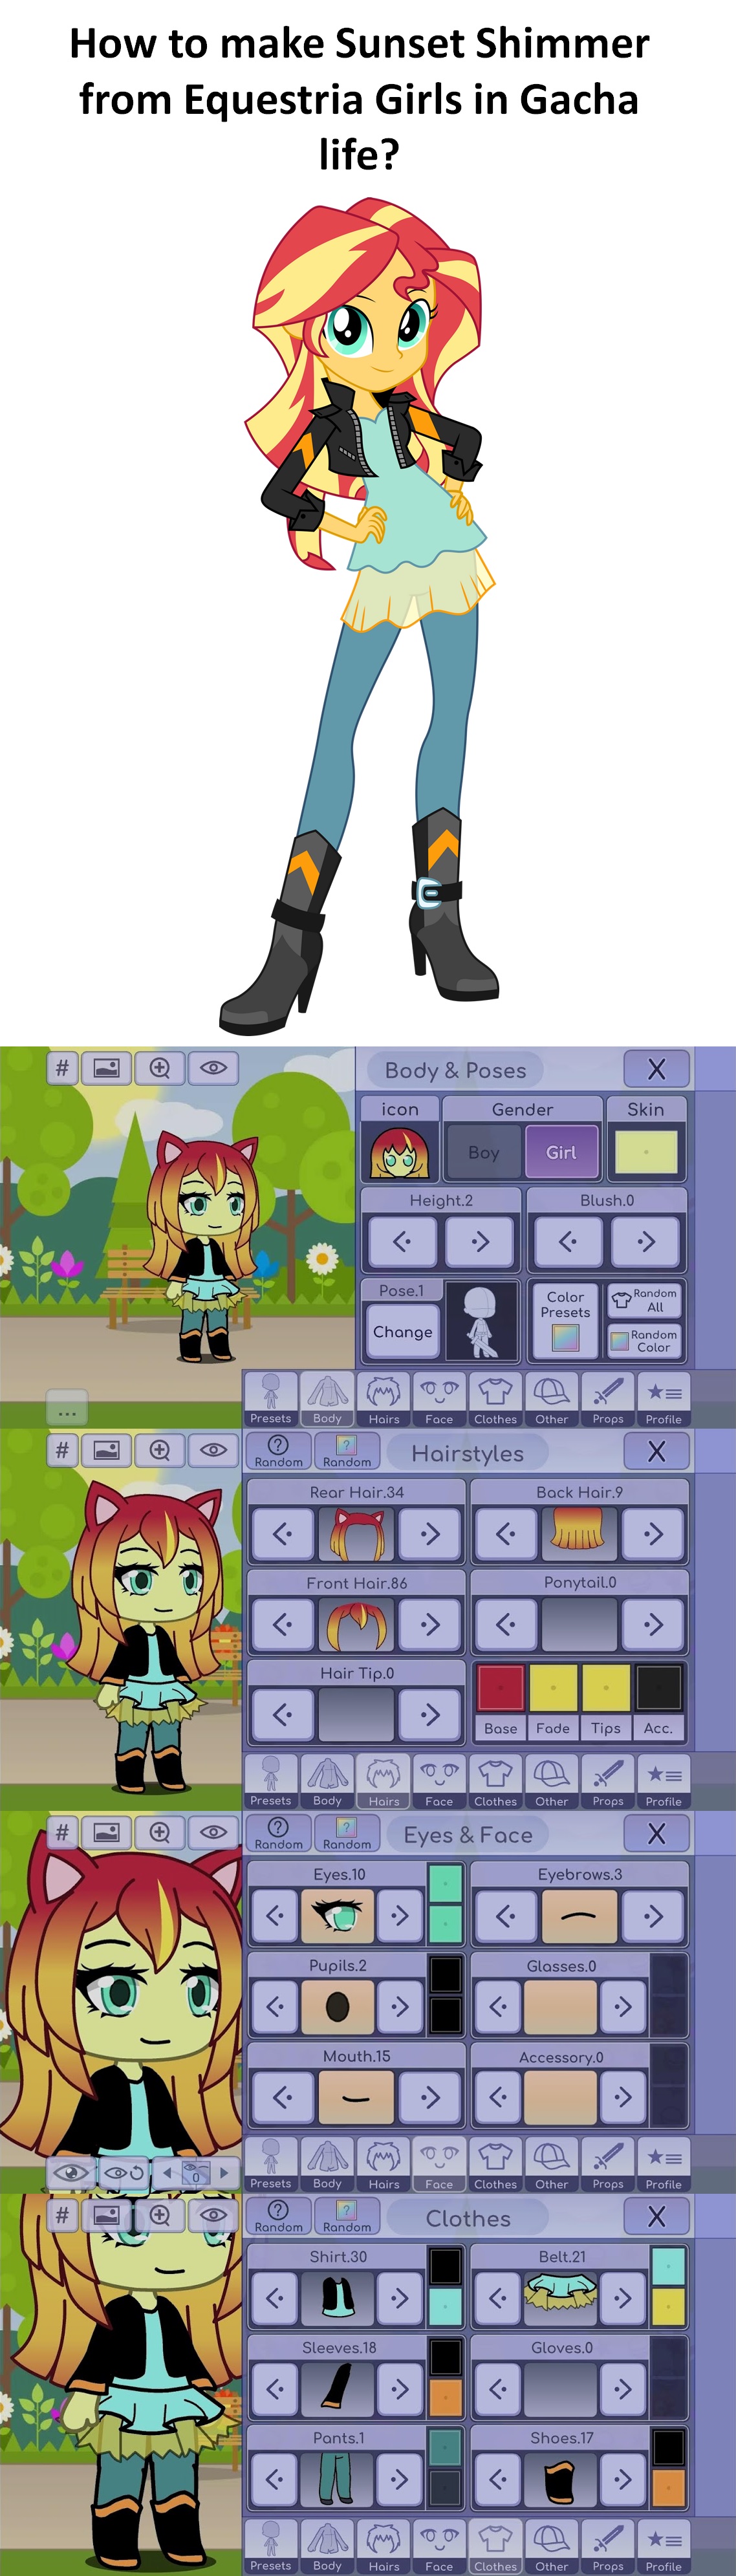 How To Make Sunset Shimmer In Gacha Life By Super Nick 01 On Deviantart